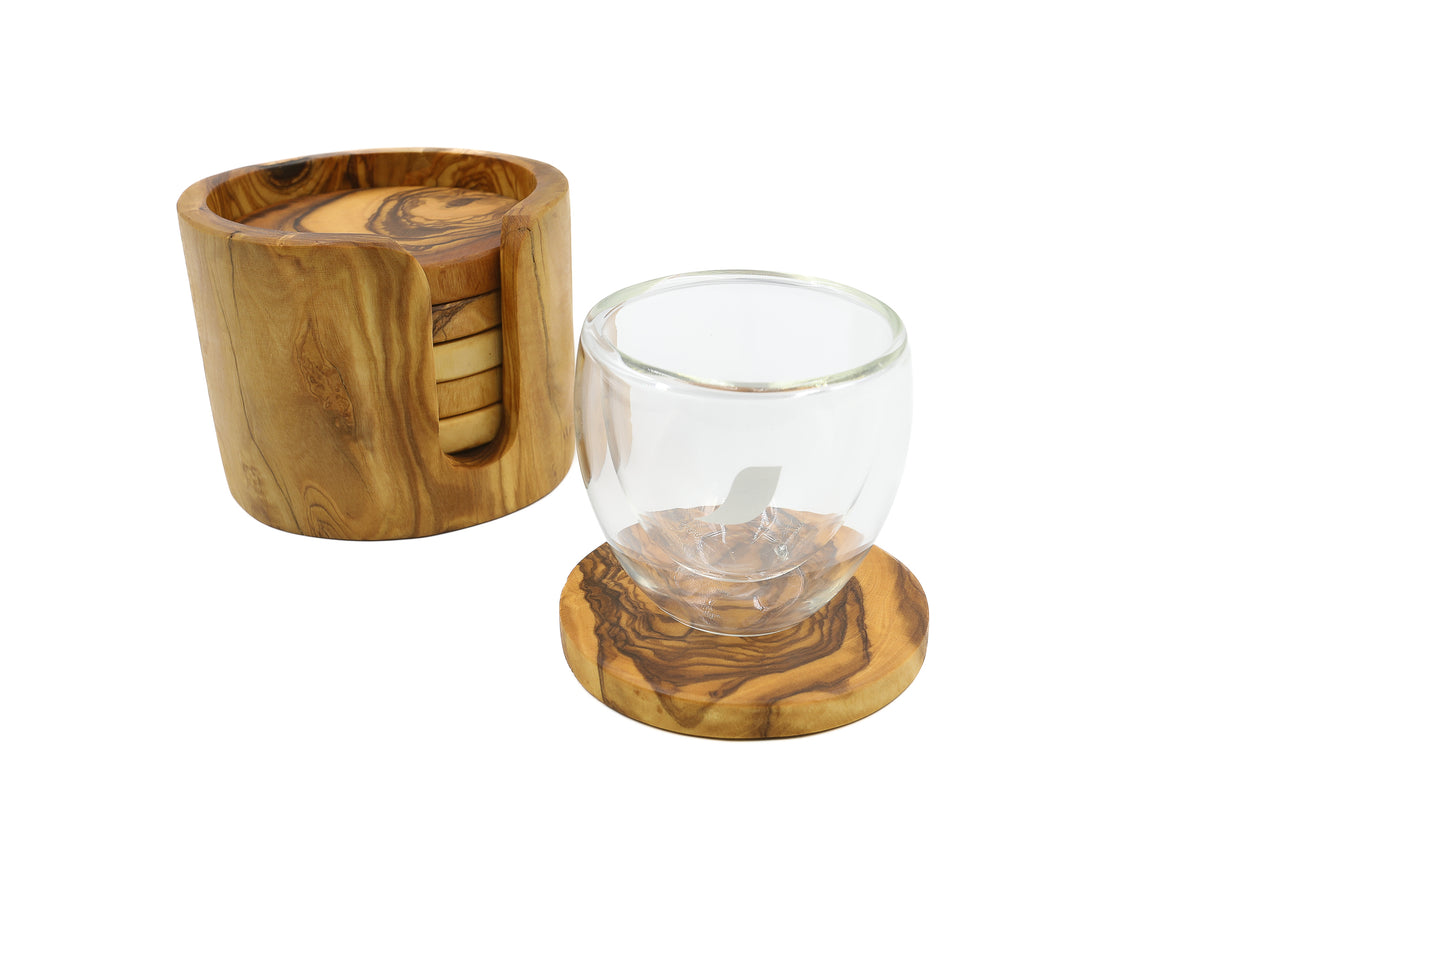 Eco-Friendly Olive Wood Table Essentials: Rustic Coasters and Heat-Resistant Trivet Stand